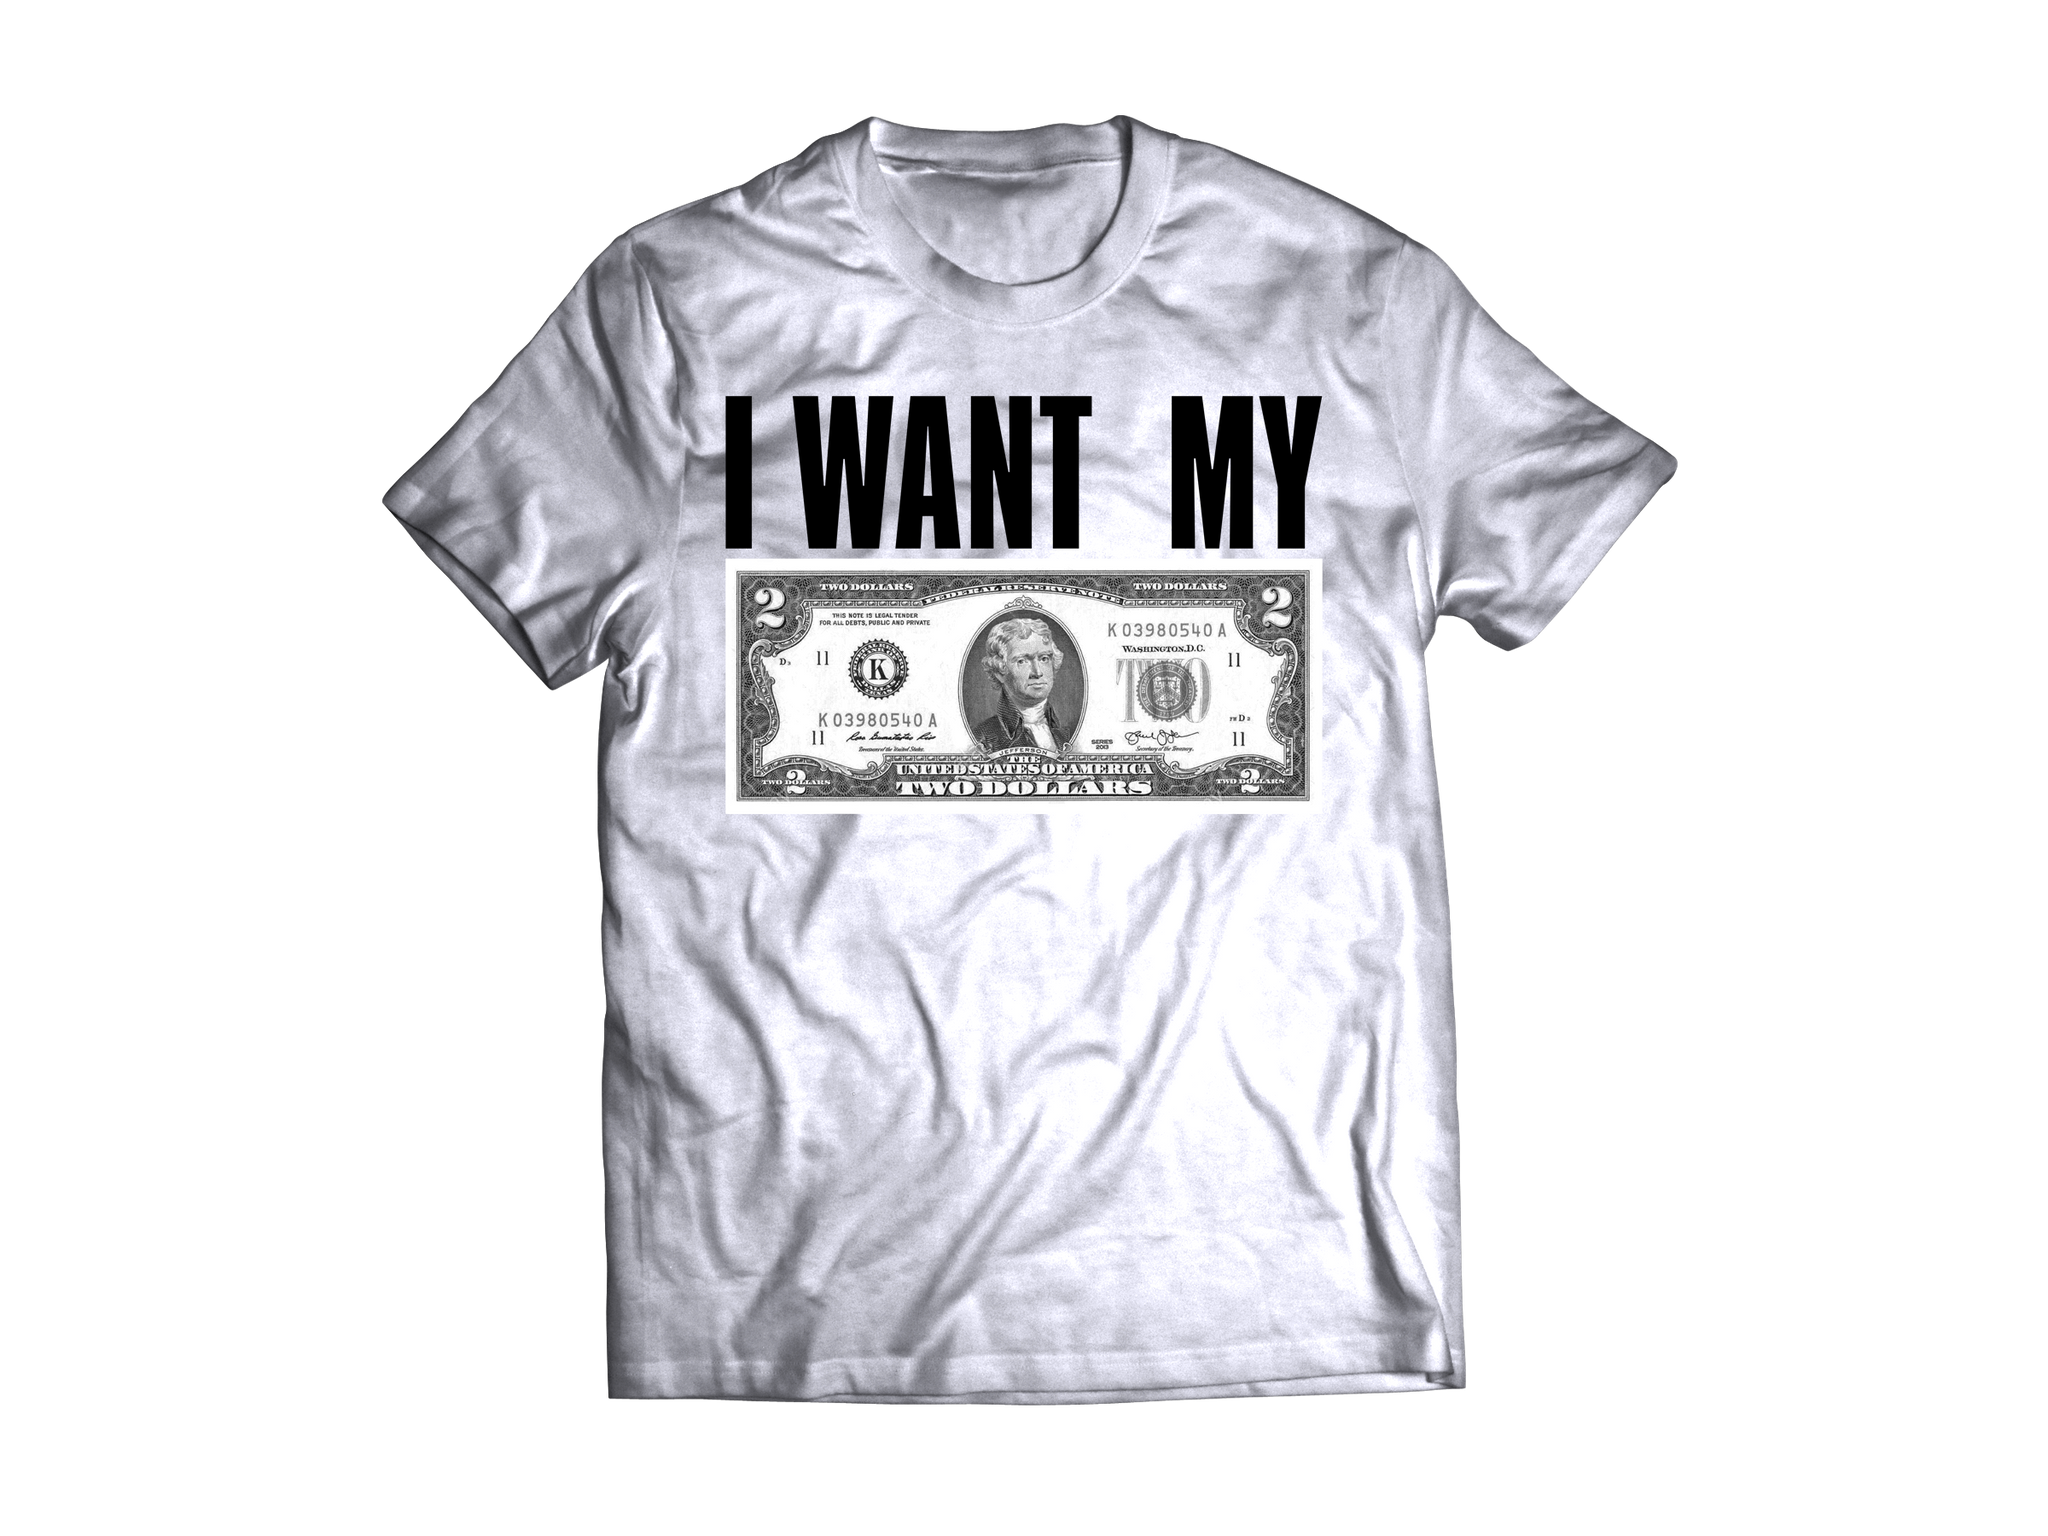 BETTER OFF DEAD "I WANT MY TWO DOLLARS" WHITE T-SHIRT